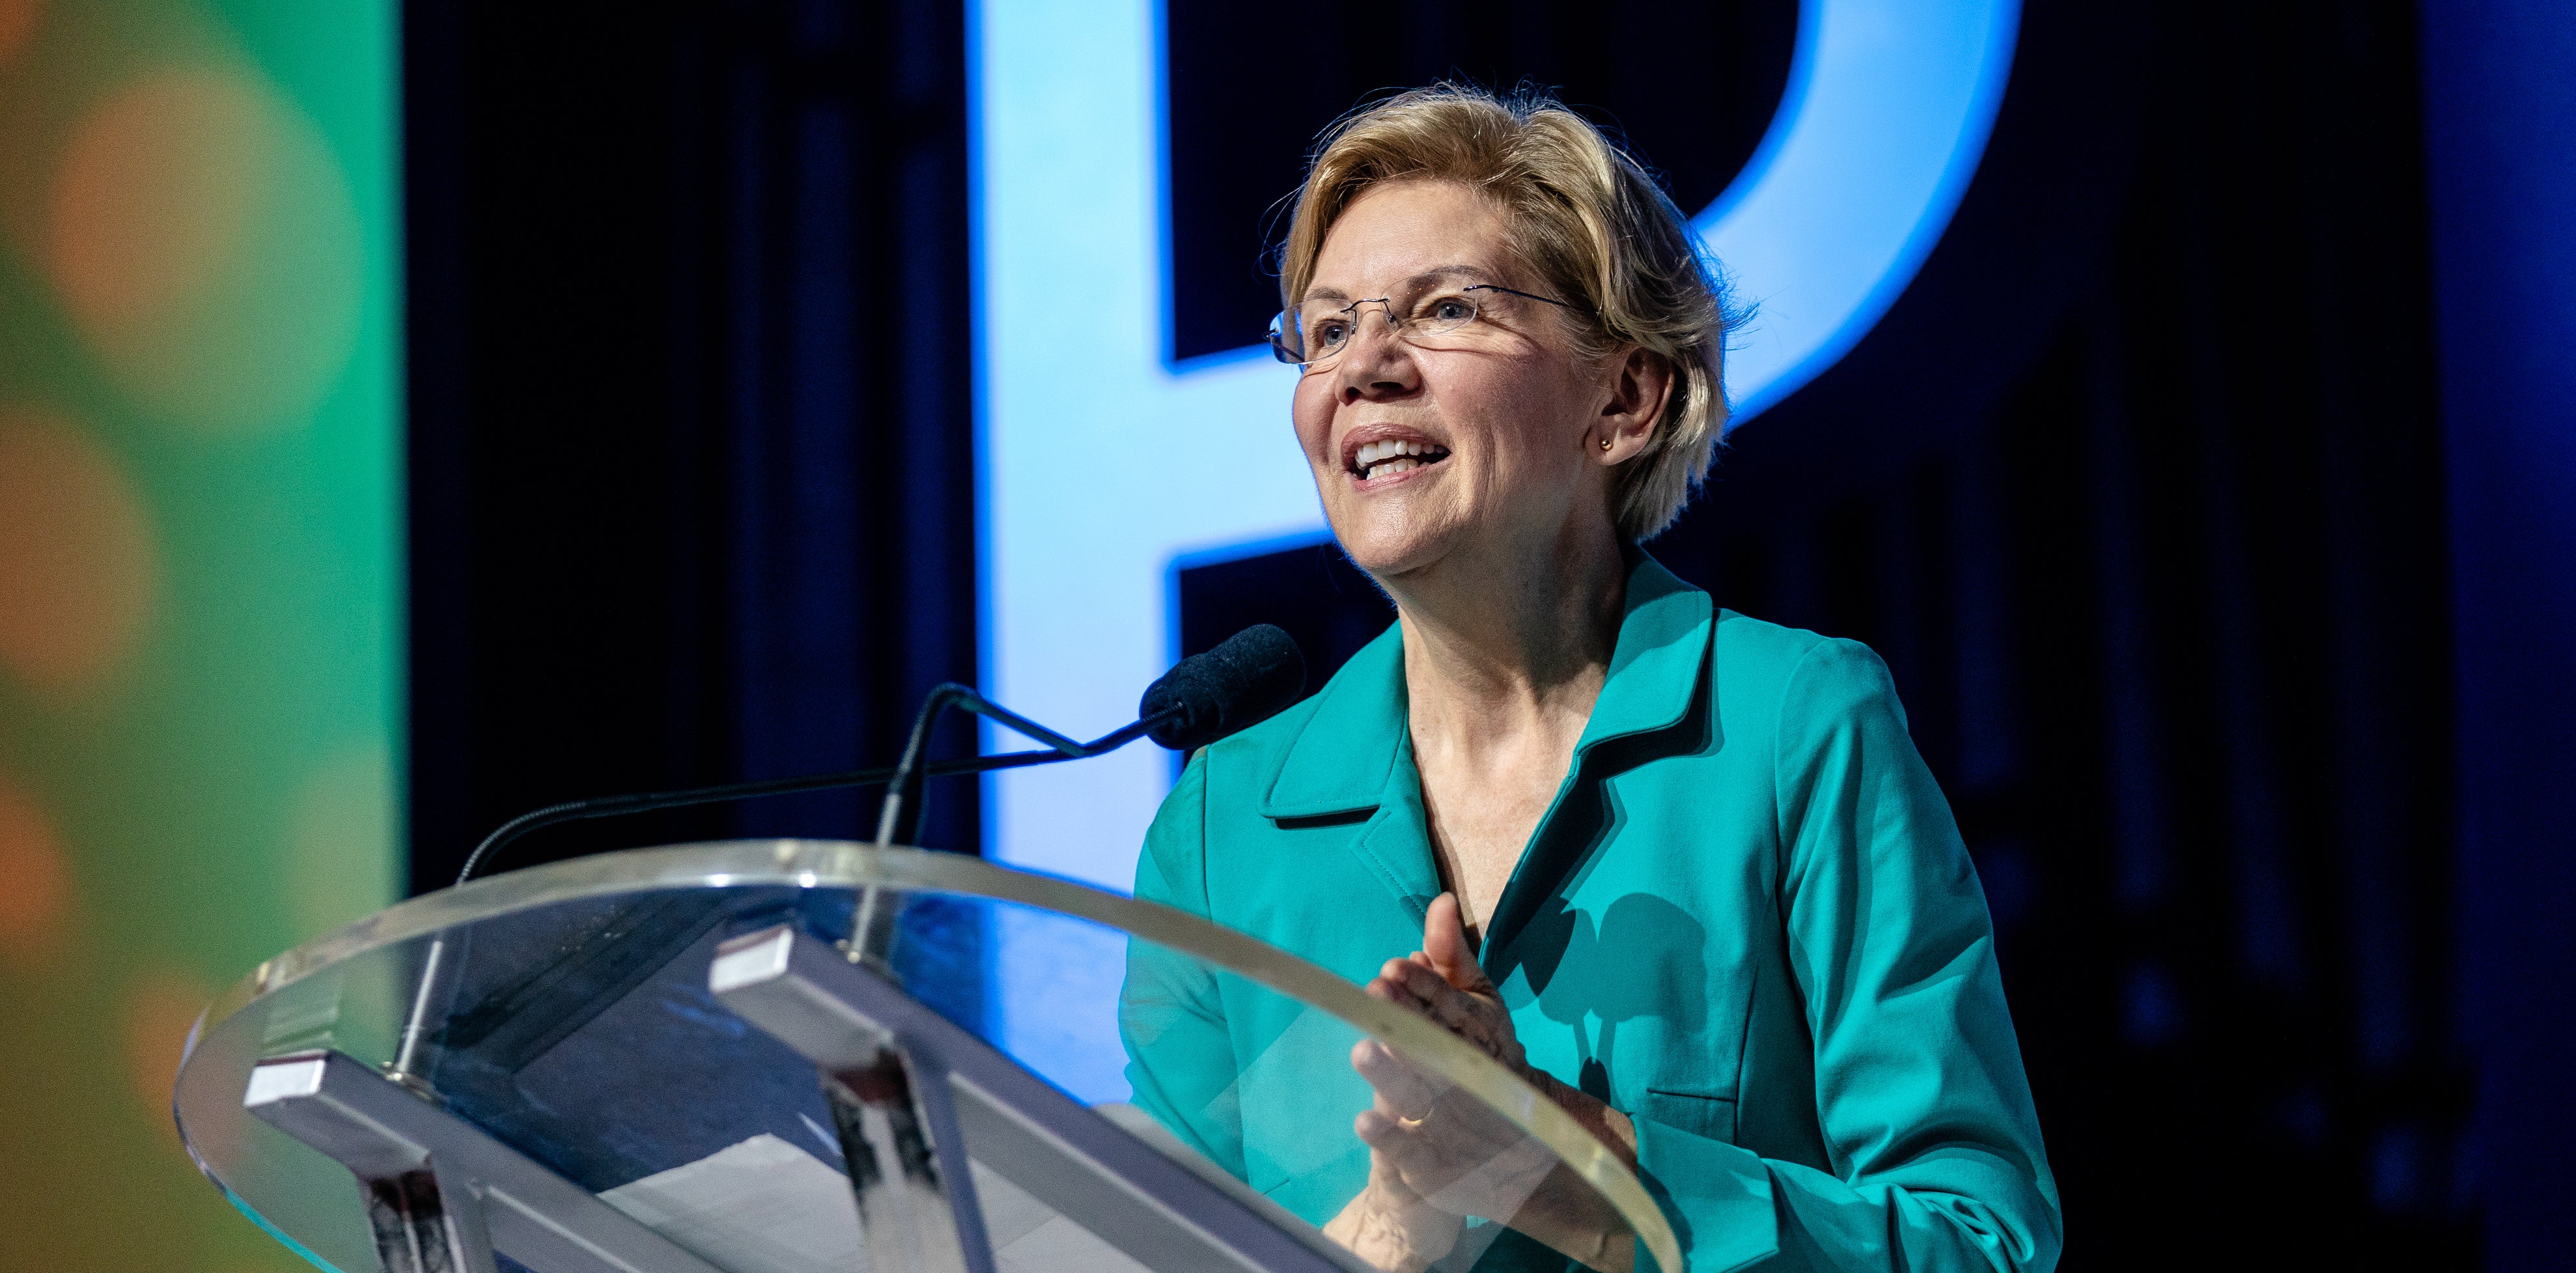 What Other Candidates Can Take From Elizabeth Warren’s Campaign